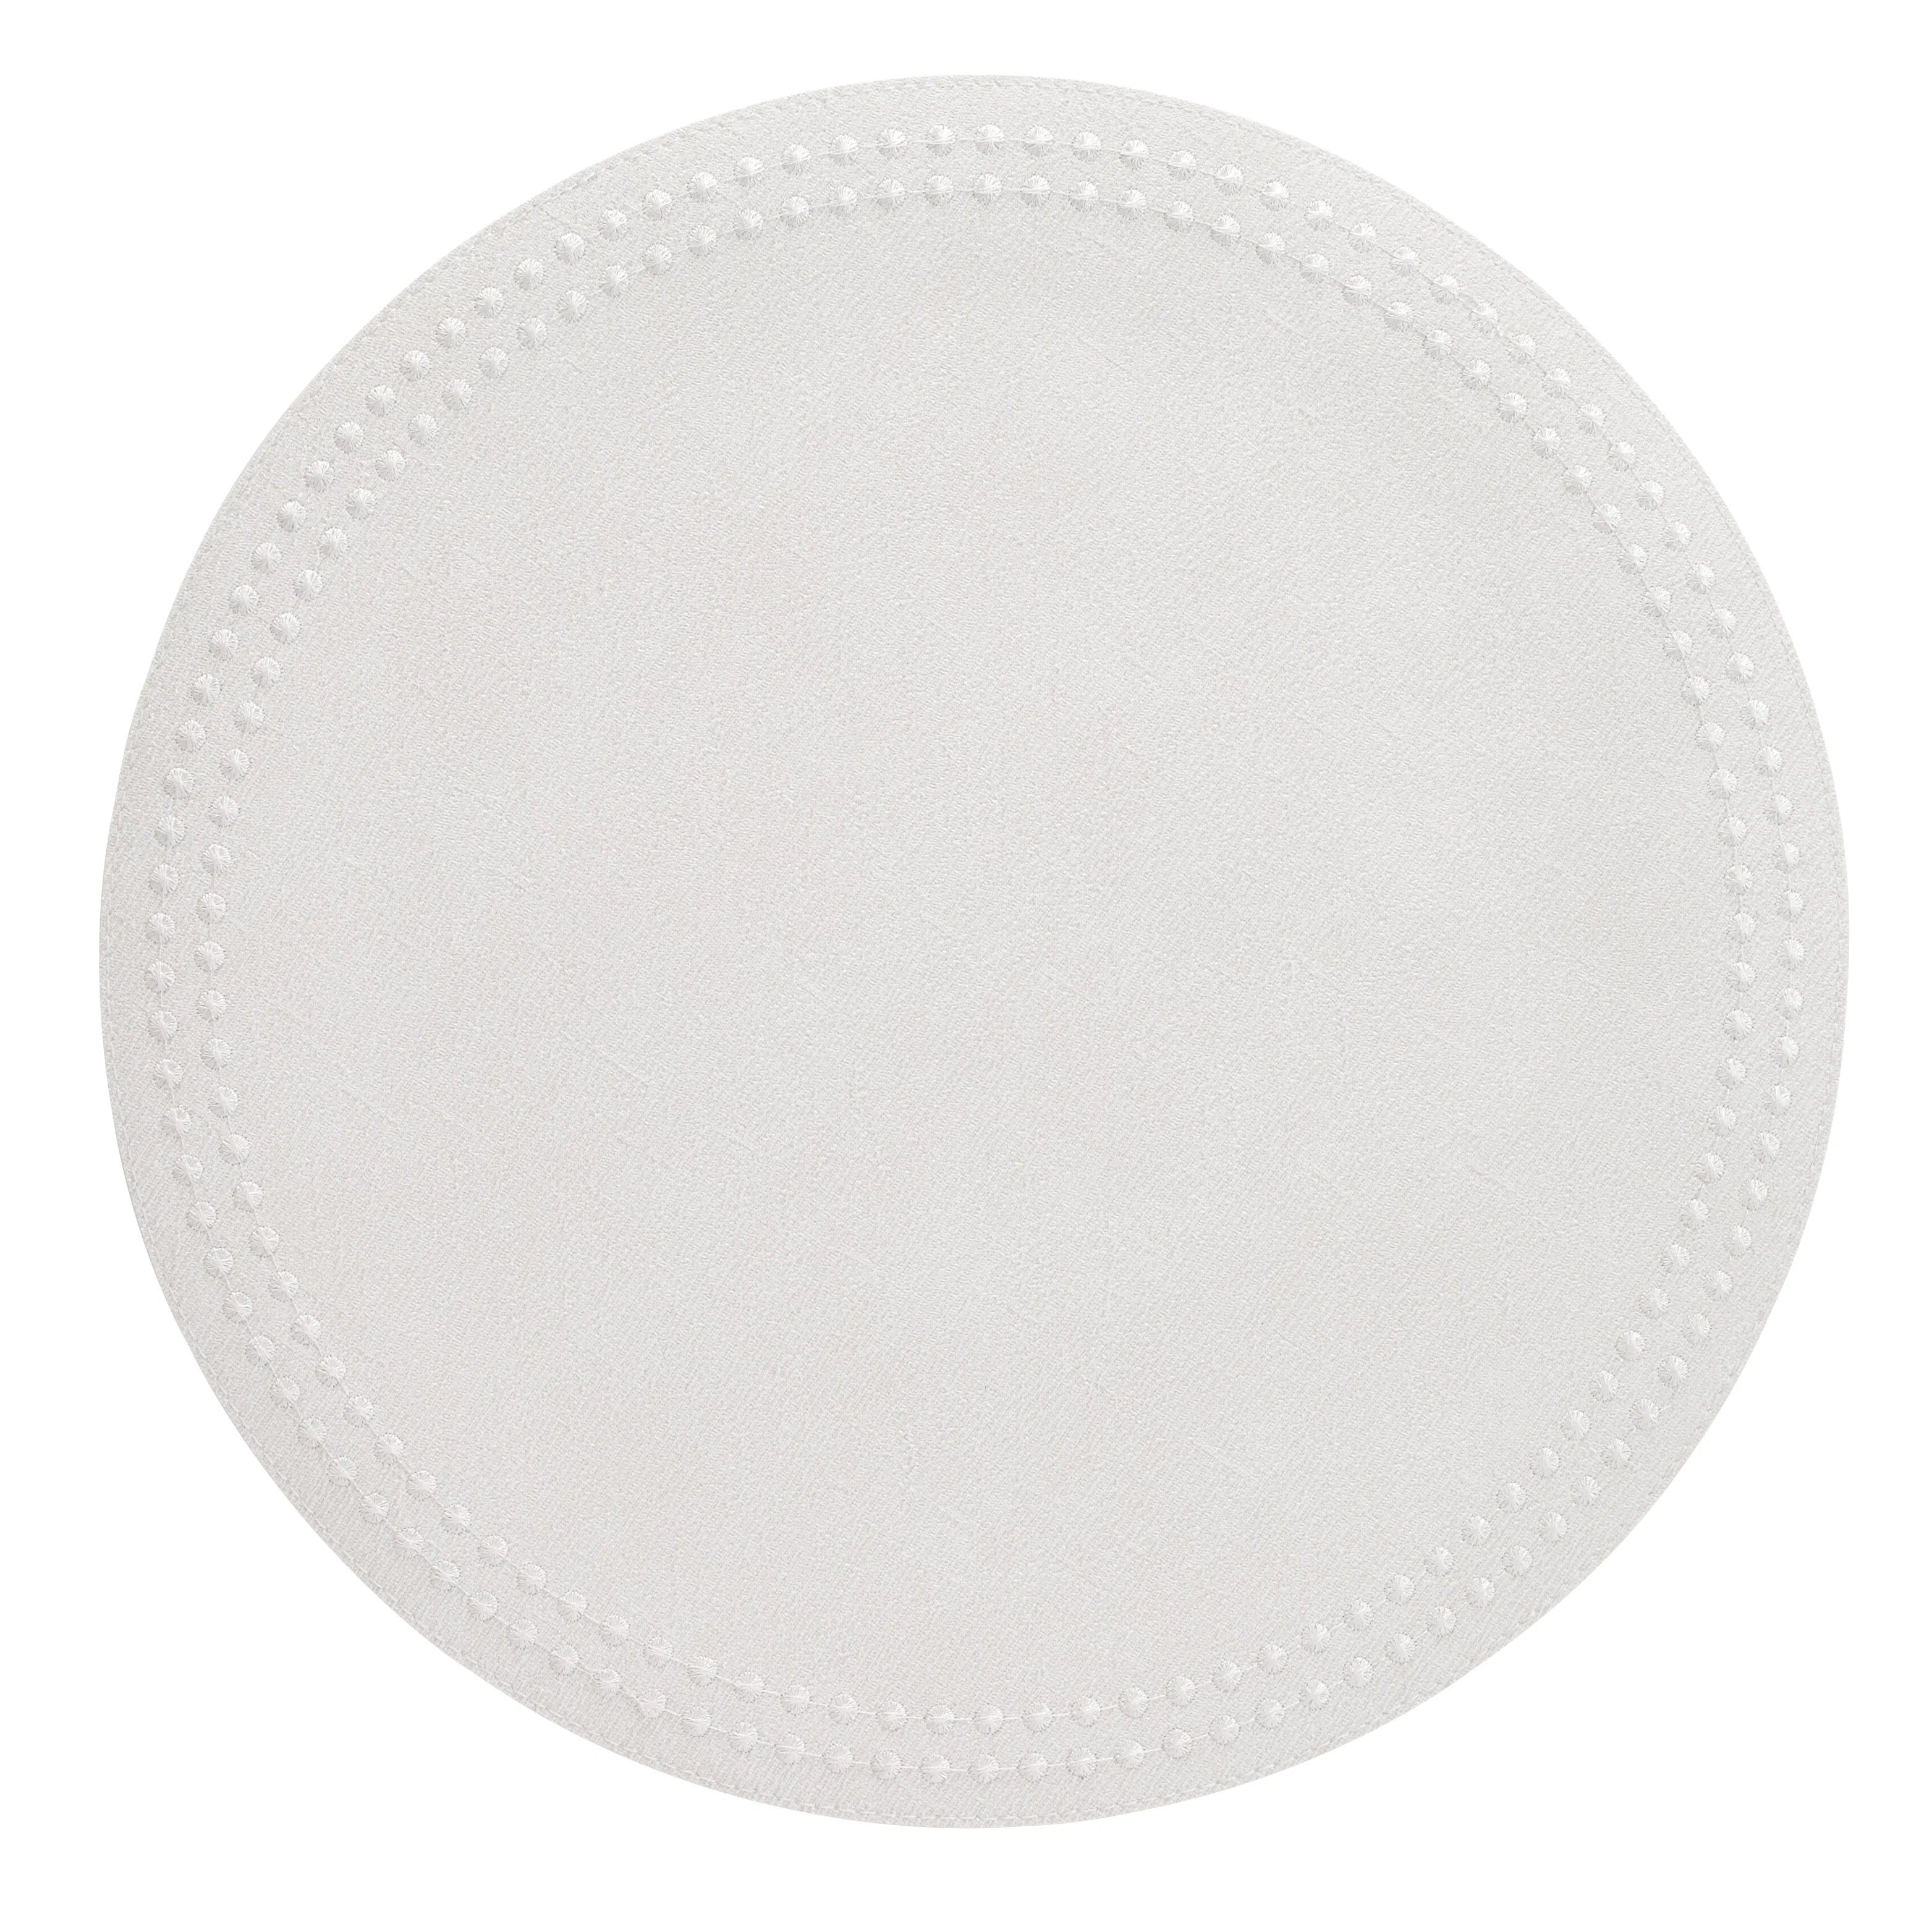 Pearls Antique White with White Placemats set/4